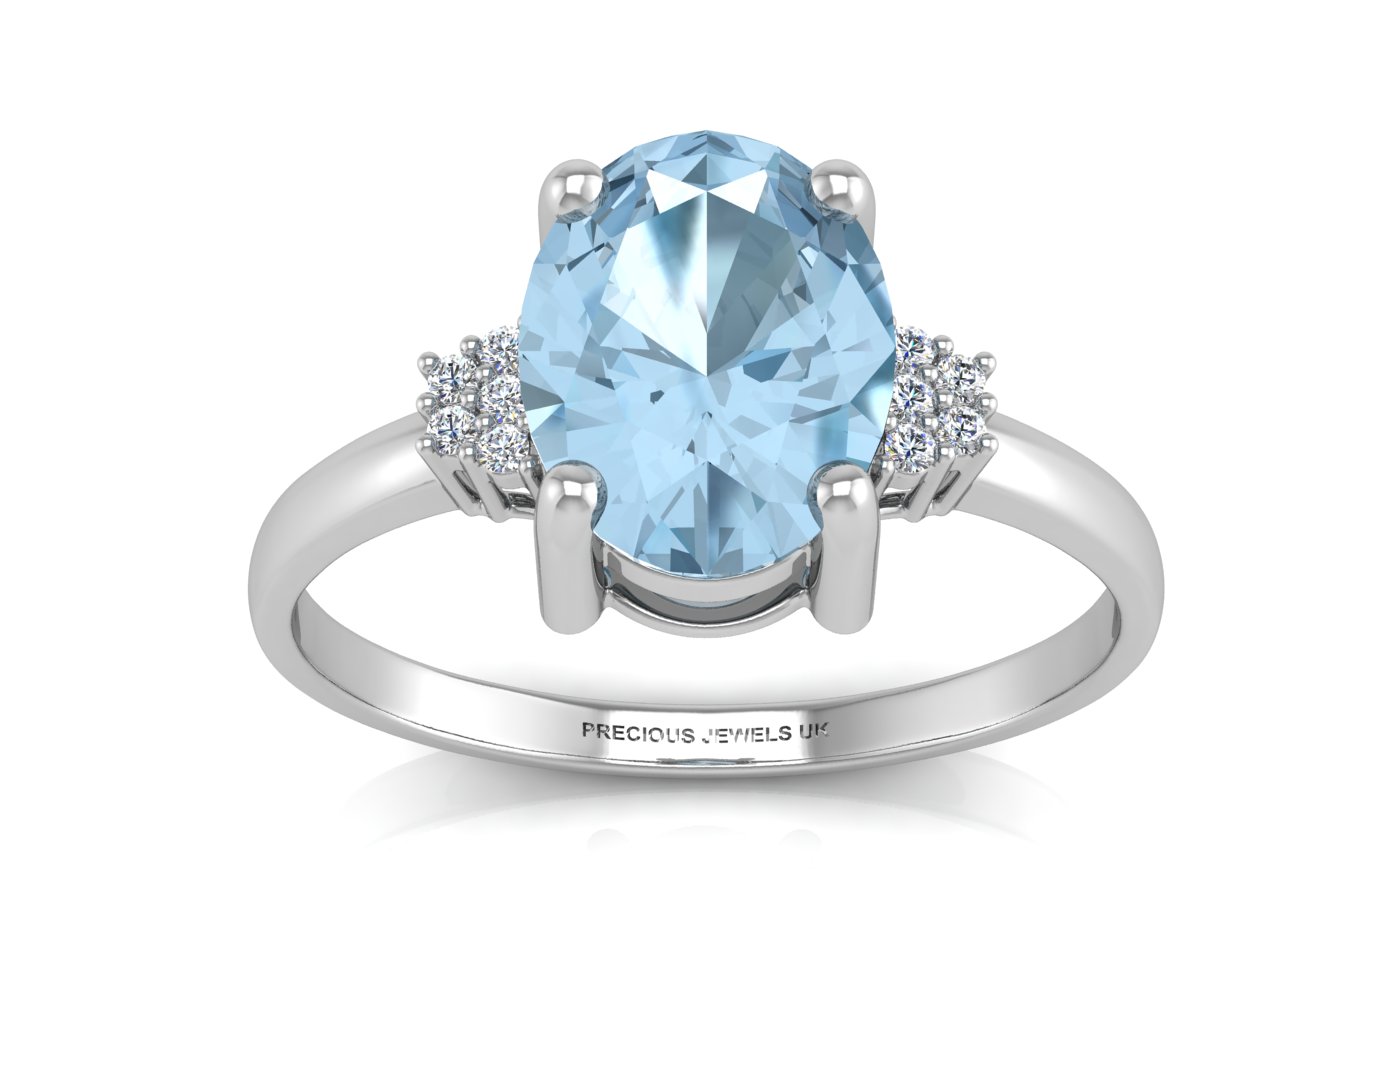 9ct White Gold Diamond And Blue Topaz Ring - Image 3 of 4